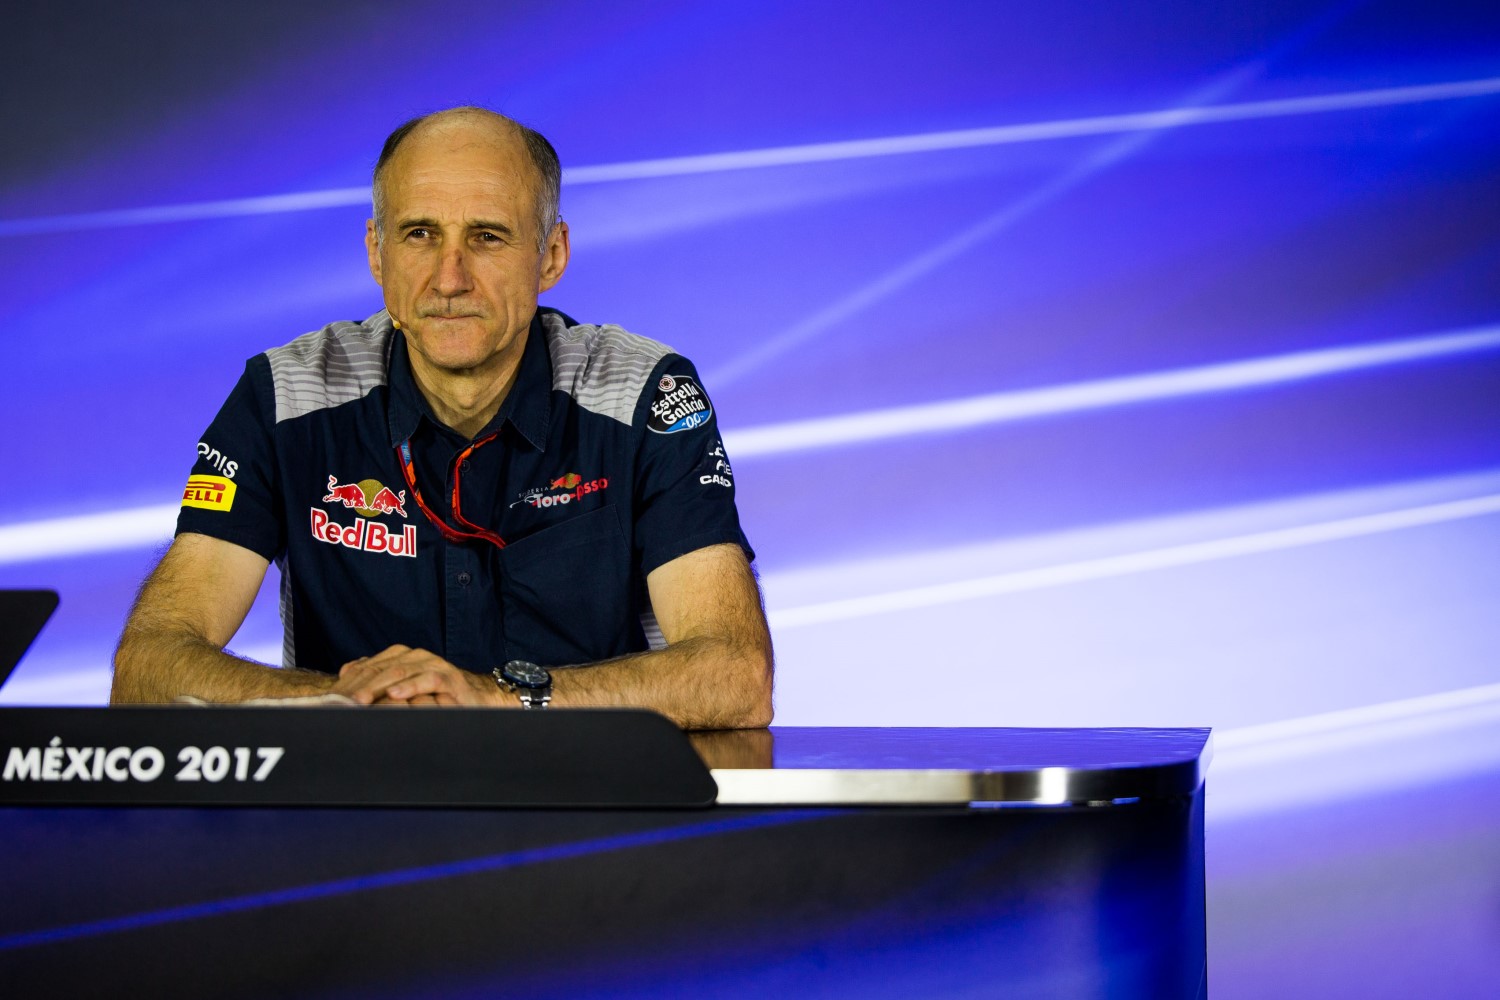 Franz Tost explains why Kvyat got the ax. However, everyone in the paddock thinks it was money - the Russian checks stopped coming